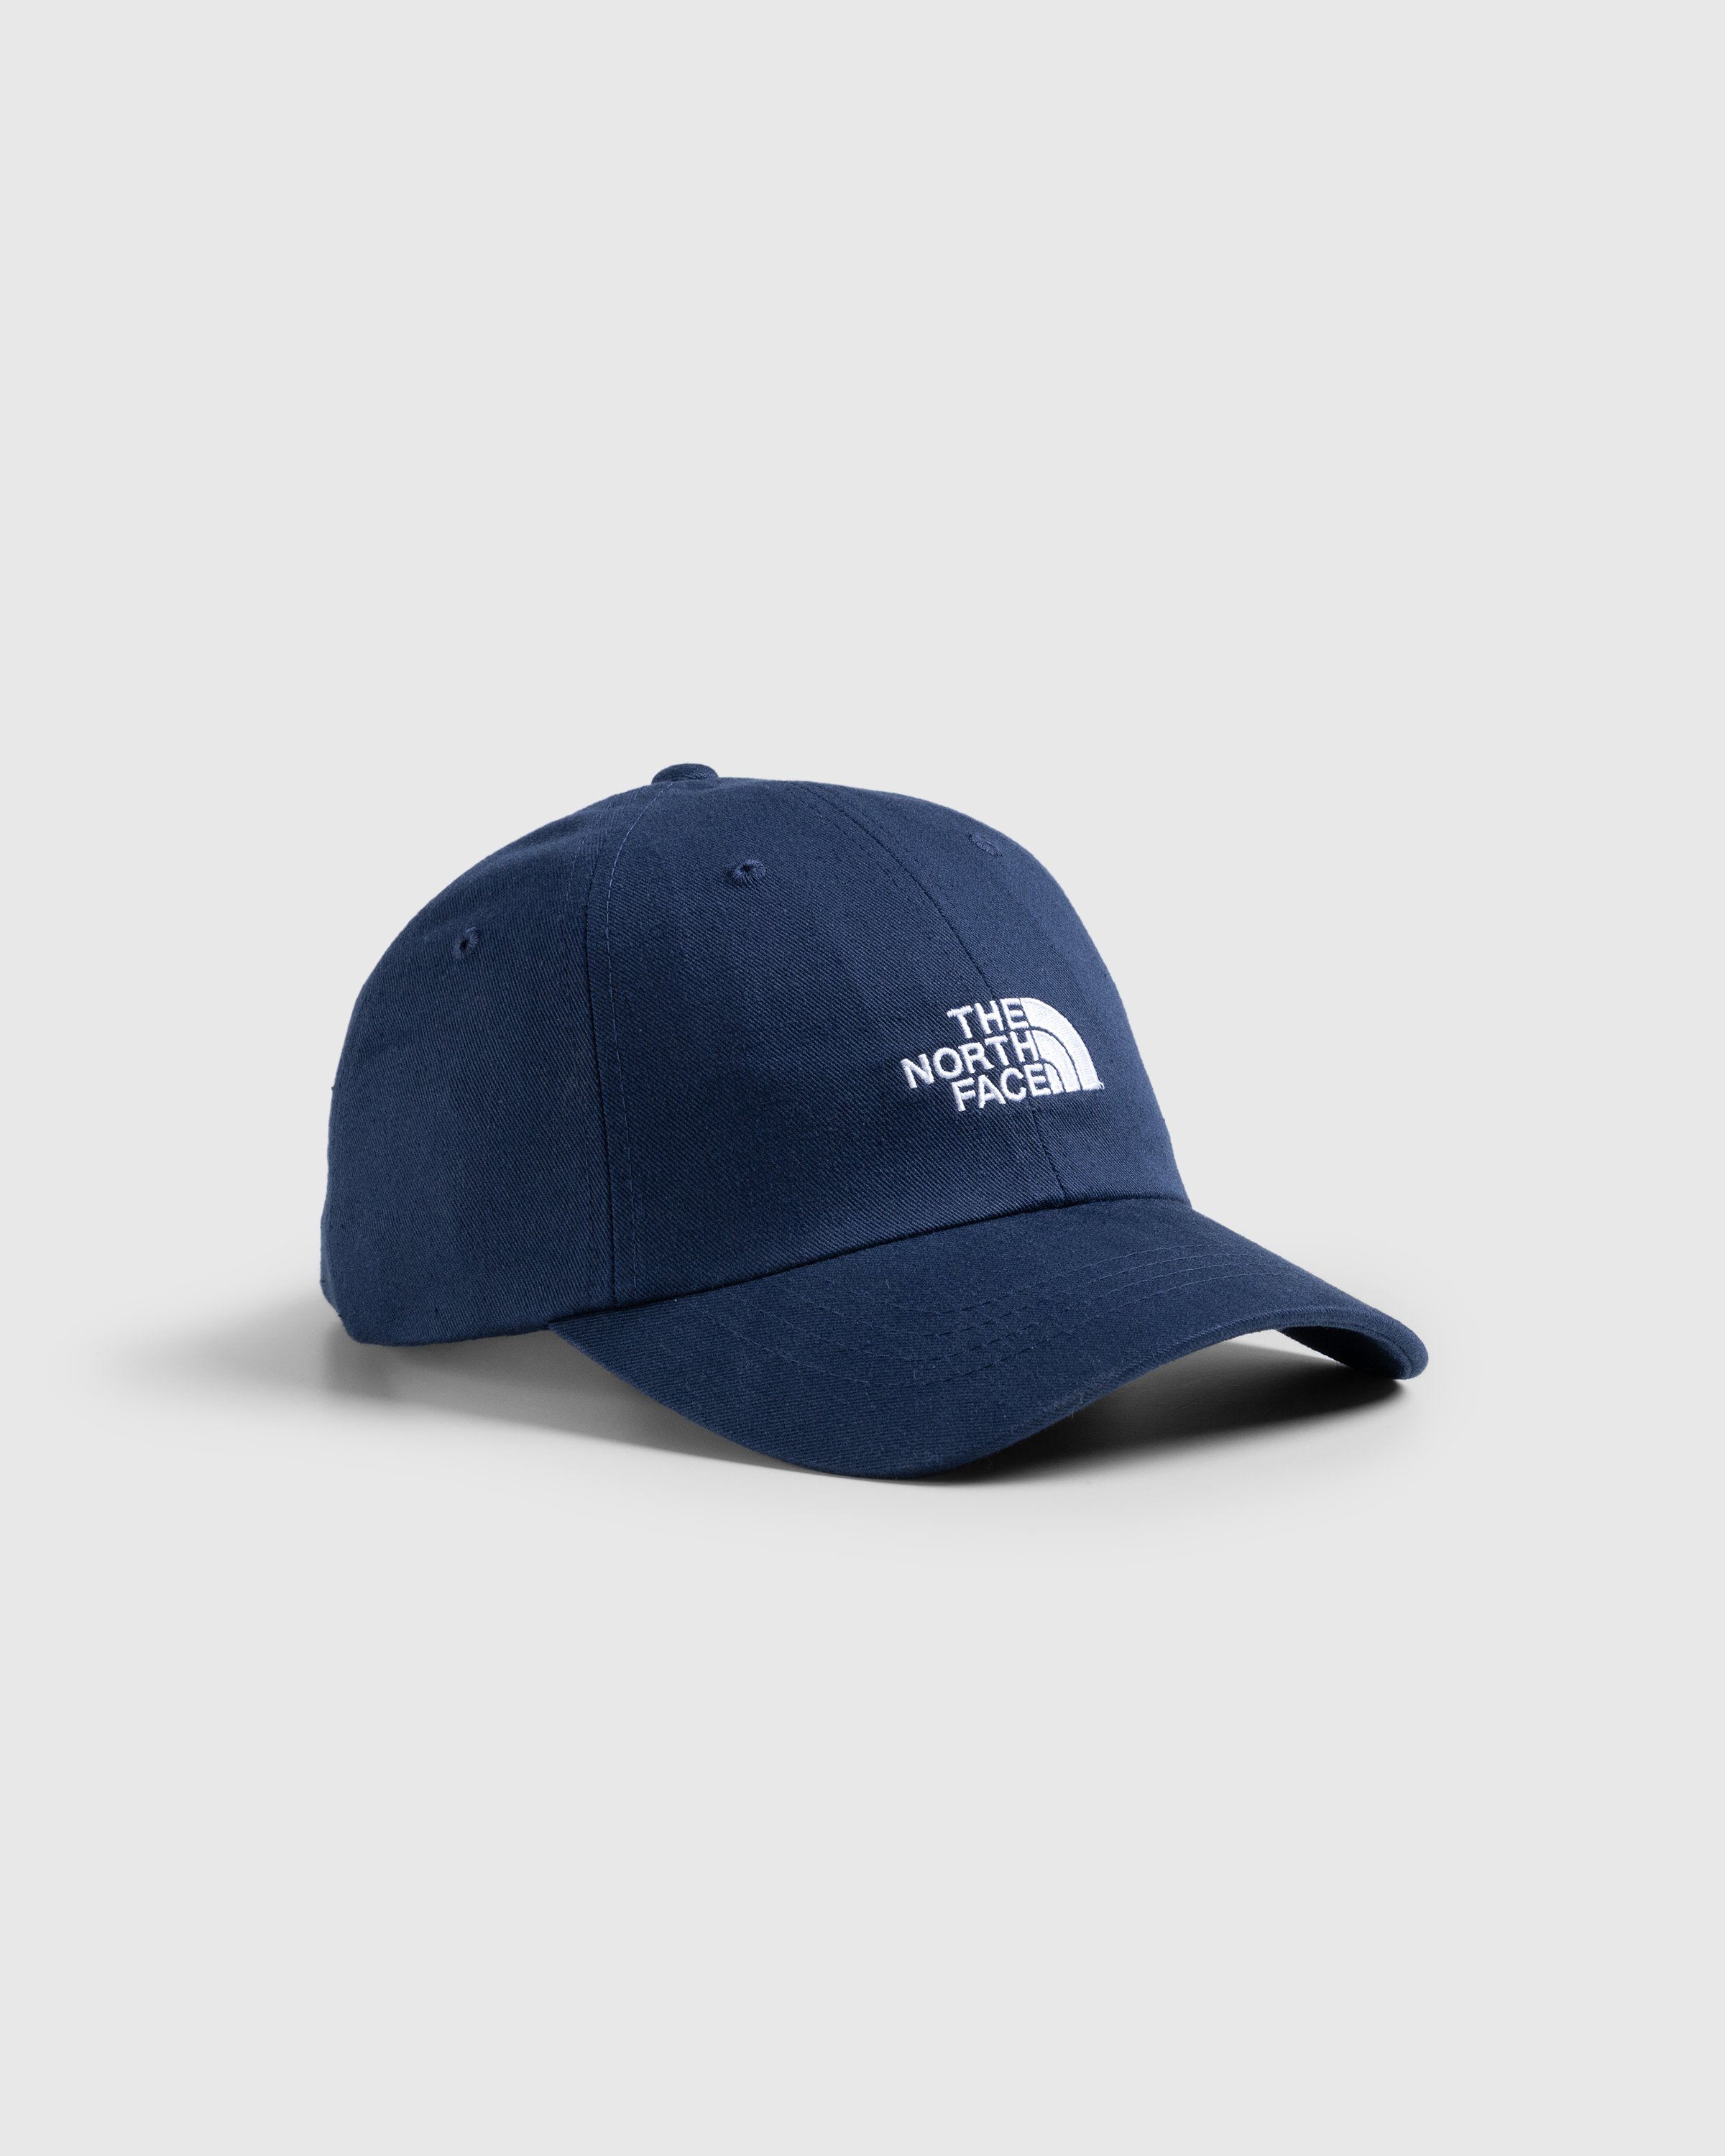 The North Face - NORM HAT SUMMIT NAVY - Accessories - Blue - Image 1